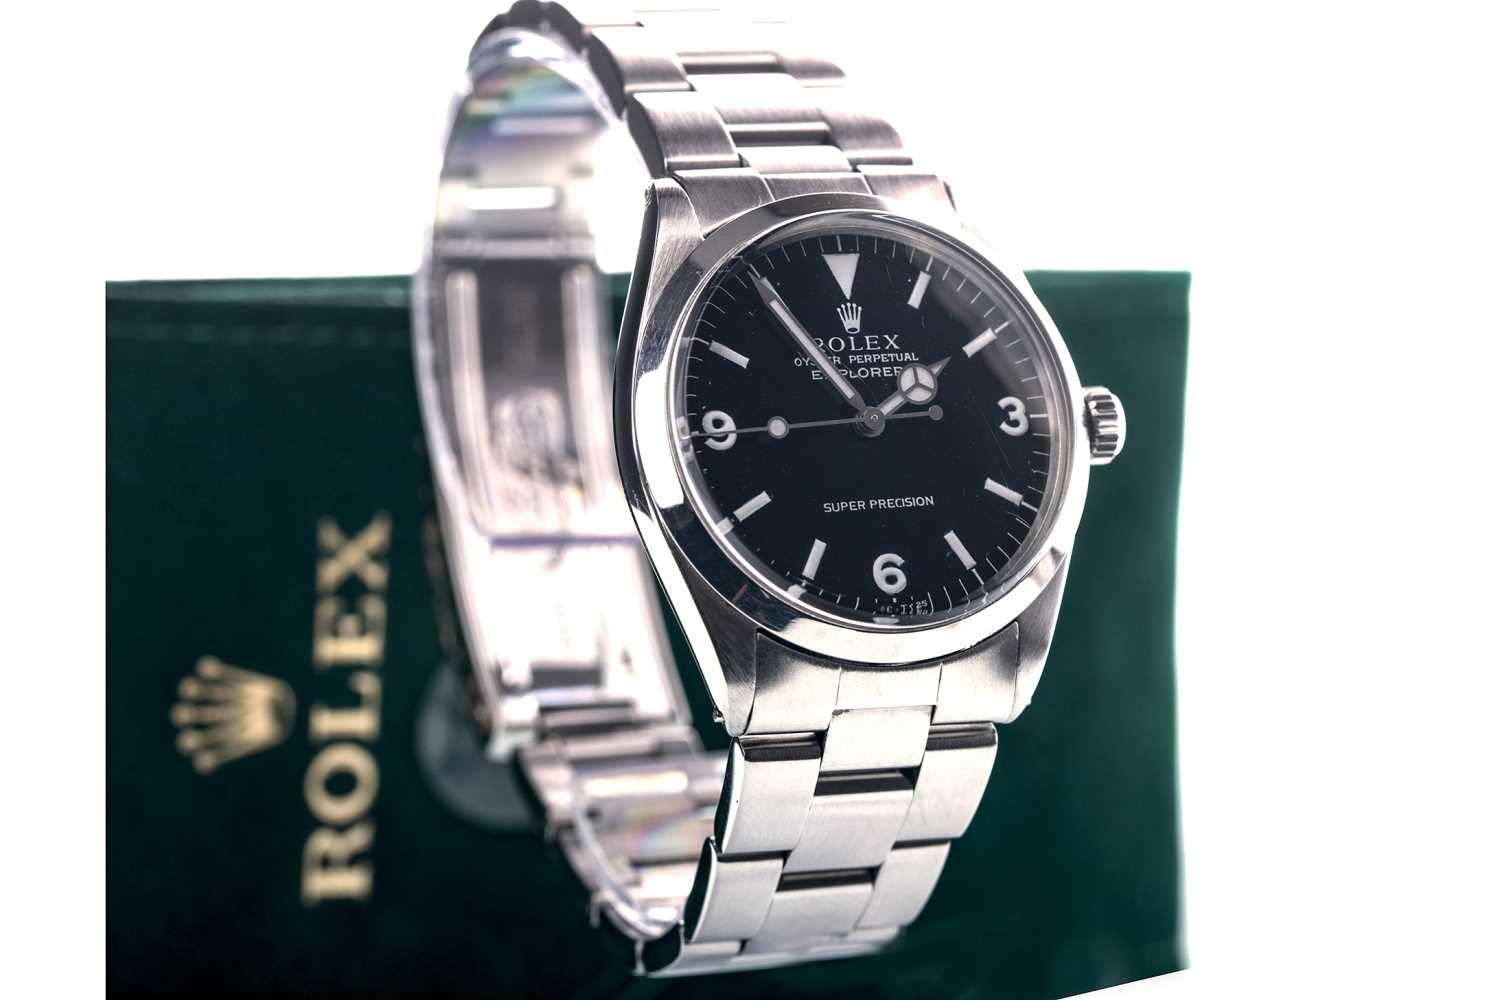 Lot 752 - A GENTLEMAN'S ROLEX OYSTER PERPETUAL EXPLORER SUPER PRECISION STAINLESS STEEL AUTOMATIC WRIST WATCH